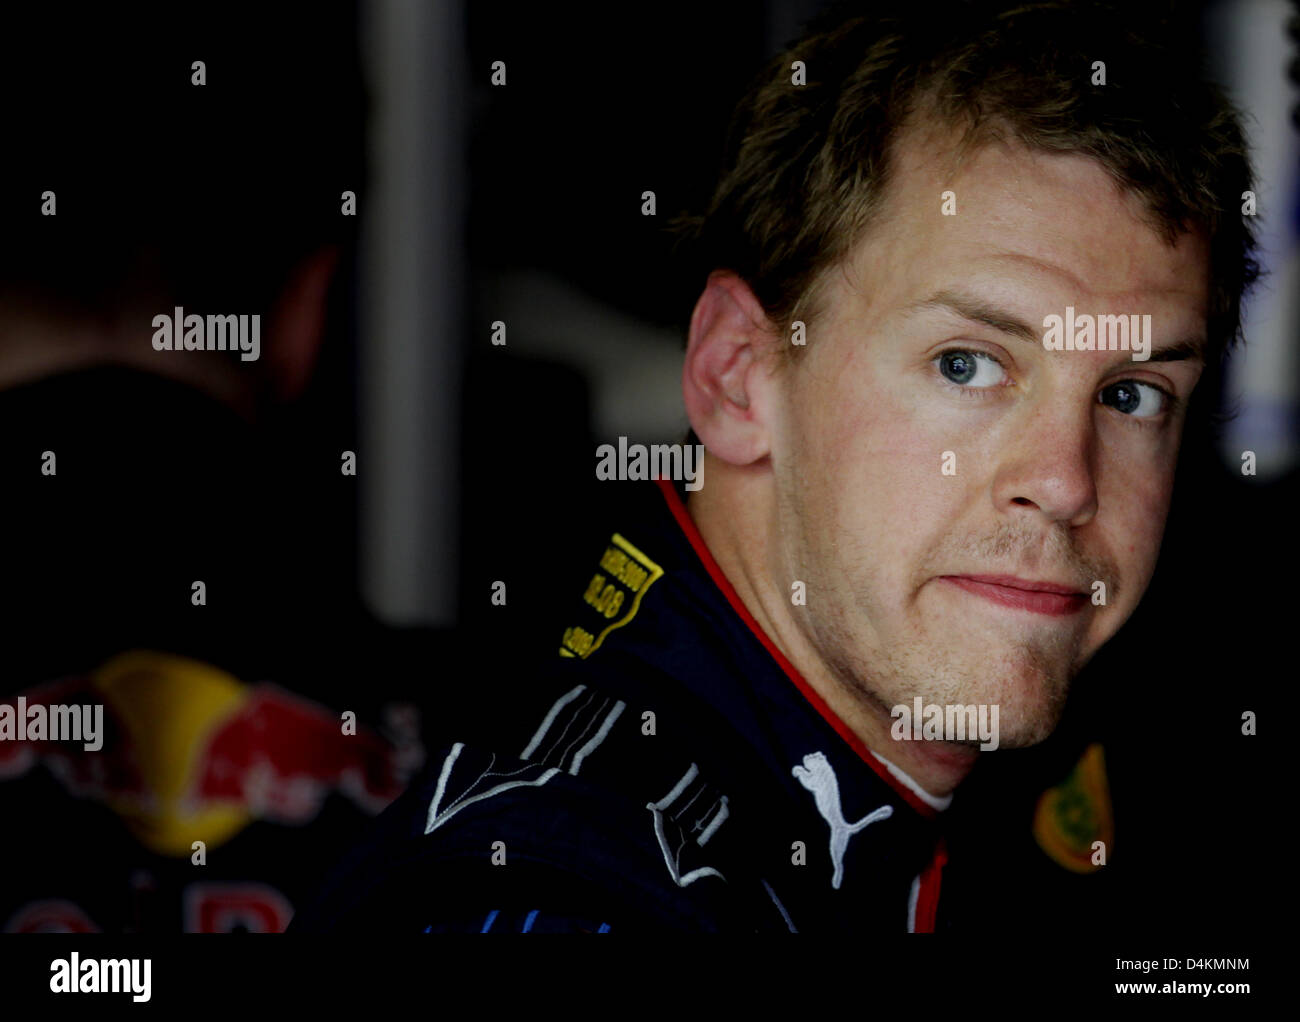 German Formula One driver Sebastian Vettel of Red Bull Racing pictured in the box after the second practice session at Circuit de Catalunya in Montmelo near Barcelona, Spain, 08 May 2009. The Grand Prix of Spain will take place on 10 May. Photo: Felix Heyder Stock Photo